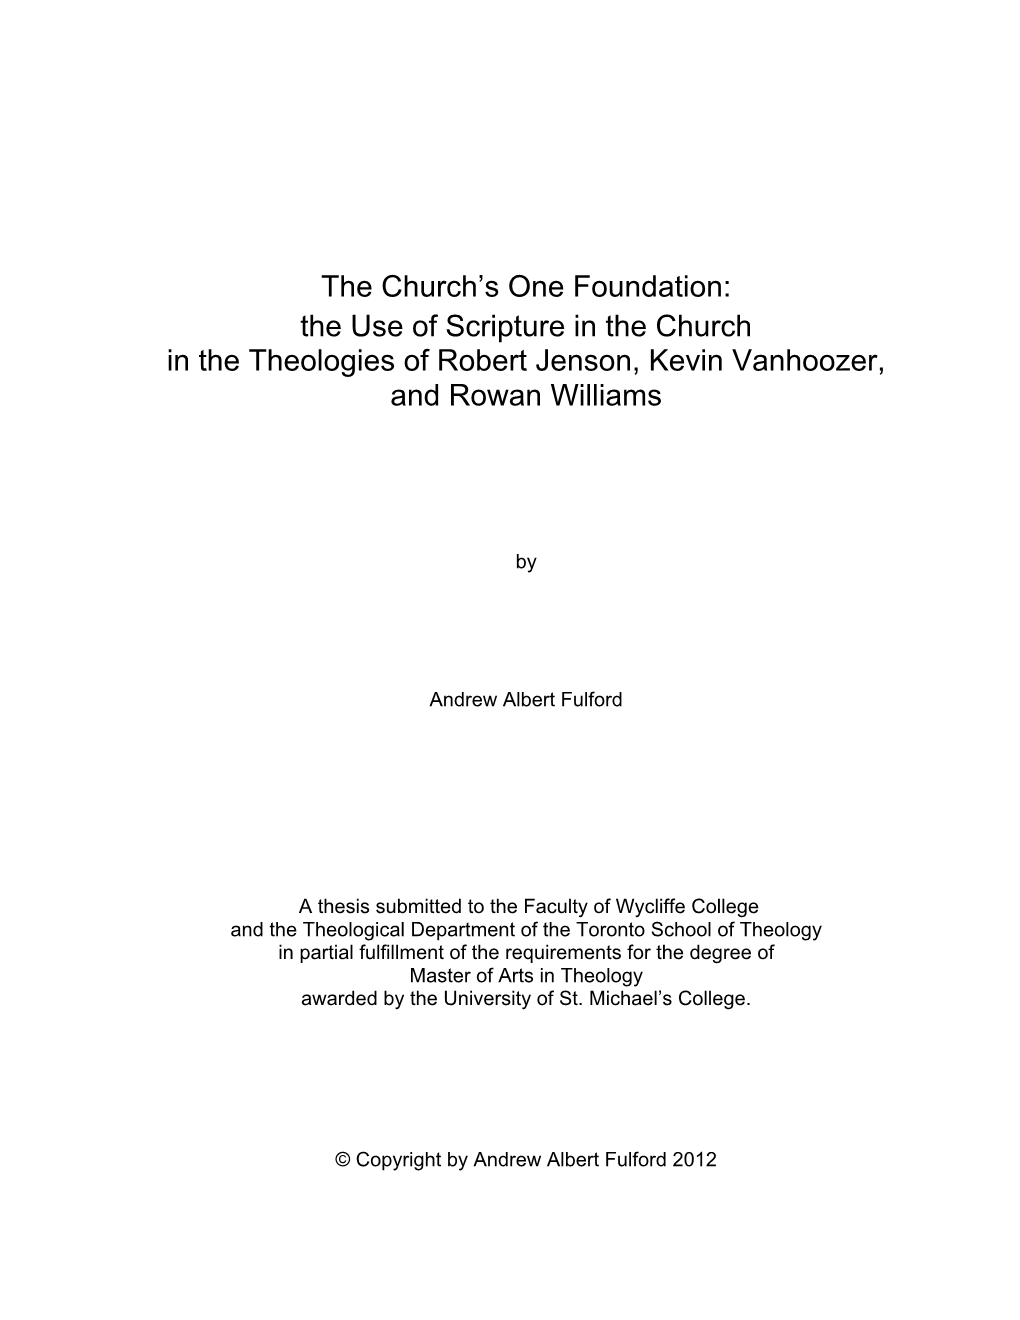 The Use of Scripture in the Church in the Theologies of Robert Jenson, Kevin Vanhoozer, and Rowan Williams